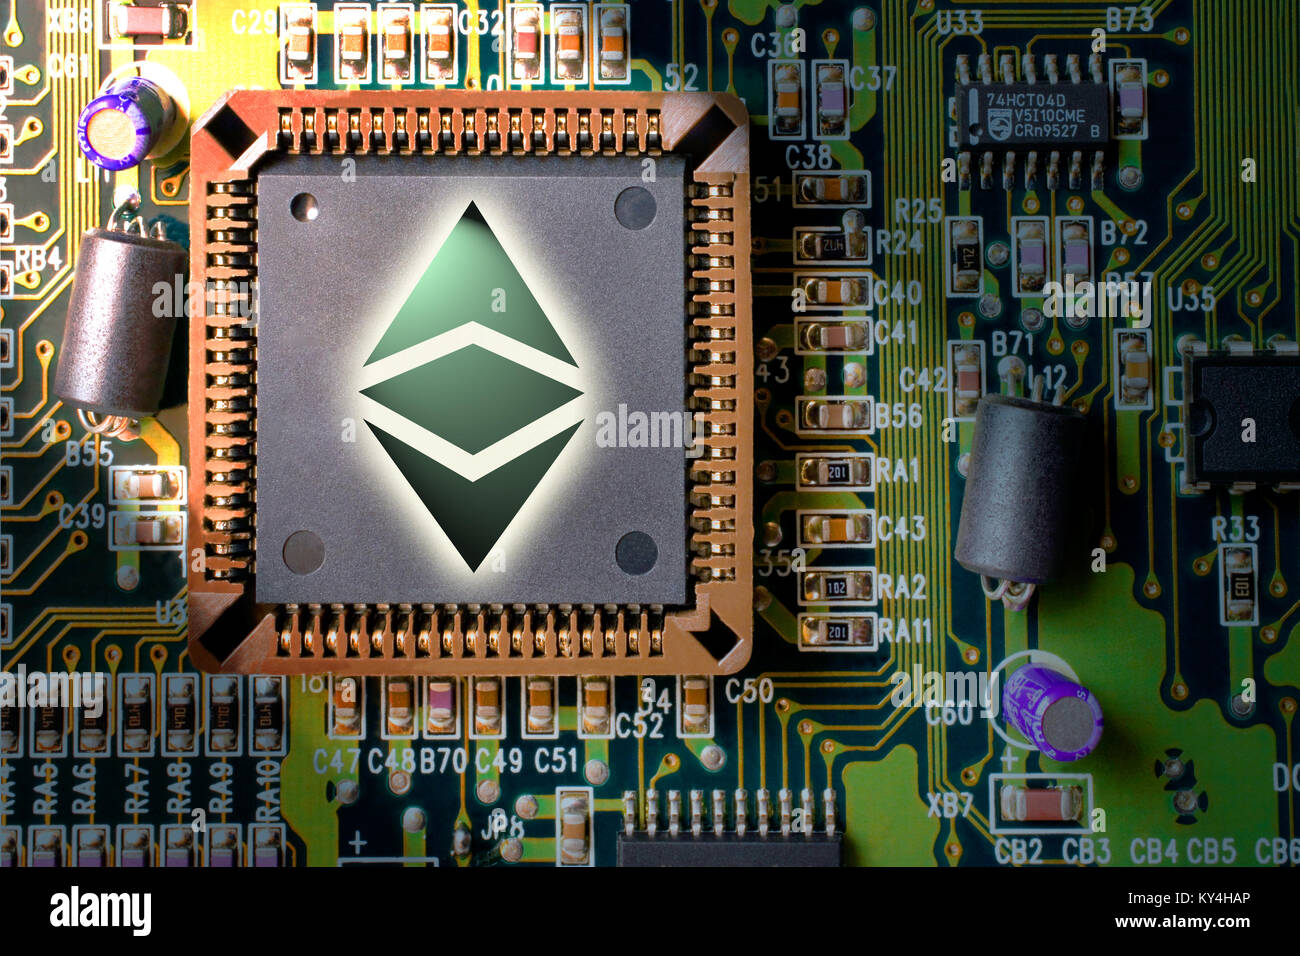 Virtual cryptocurrency and blockchain - financial technology and internet money - circuit board mining and coin Ethereum Classic (ETC) Stock Photo